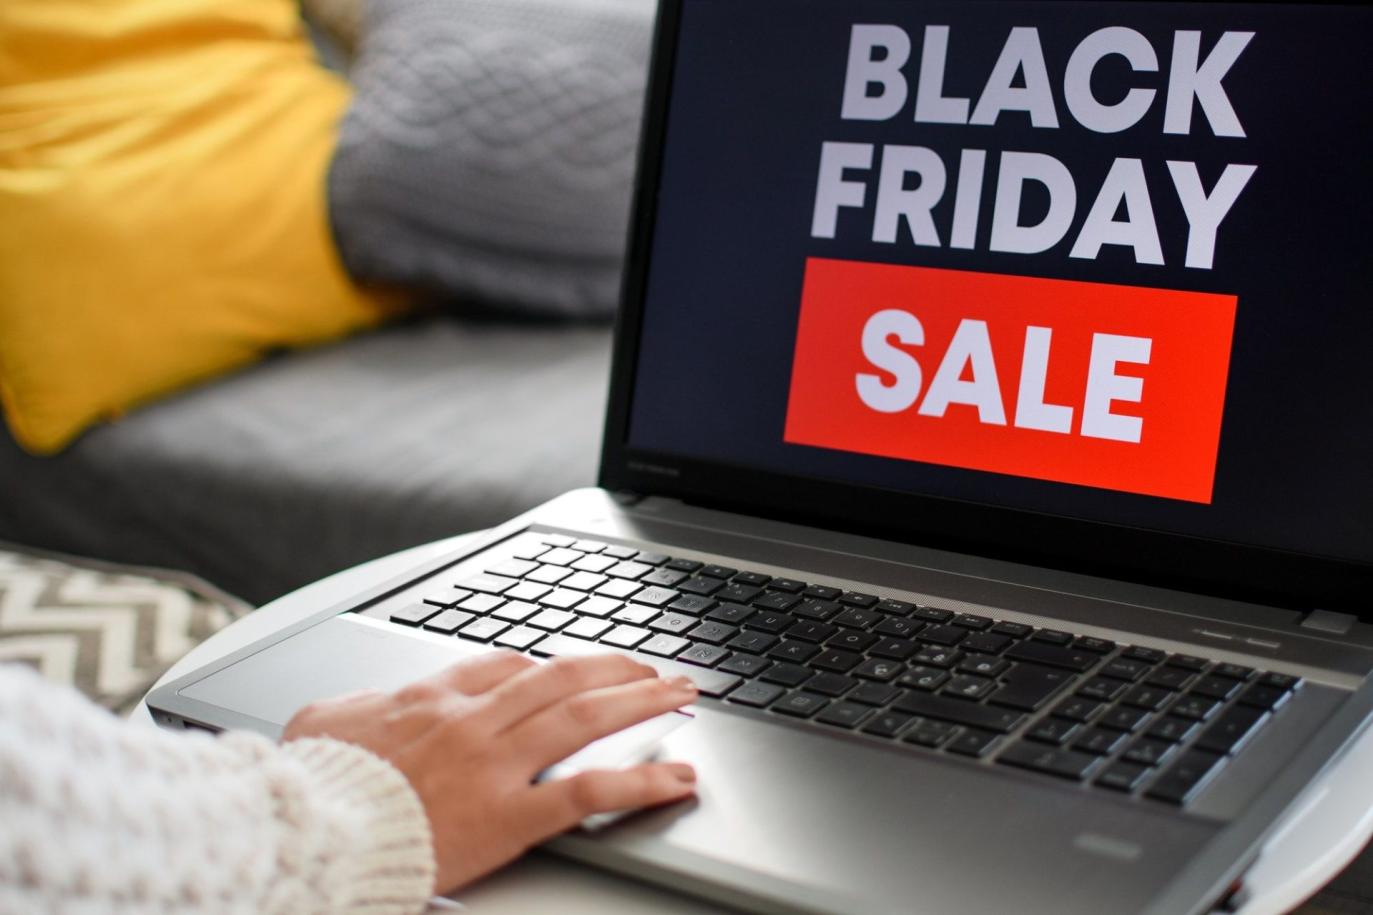 What Are Some Of The Best Black Friday Deals On Tech Gadgets?